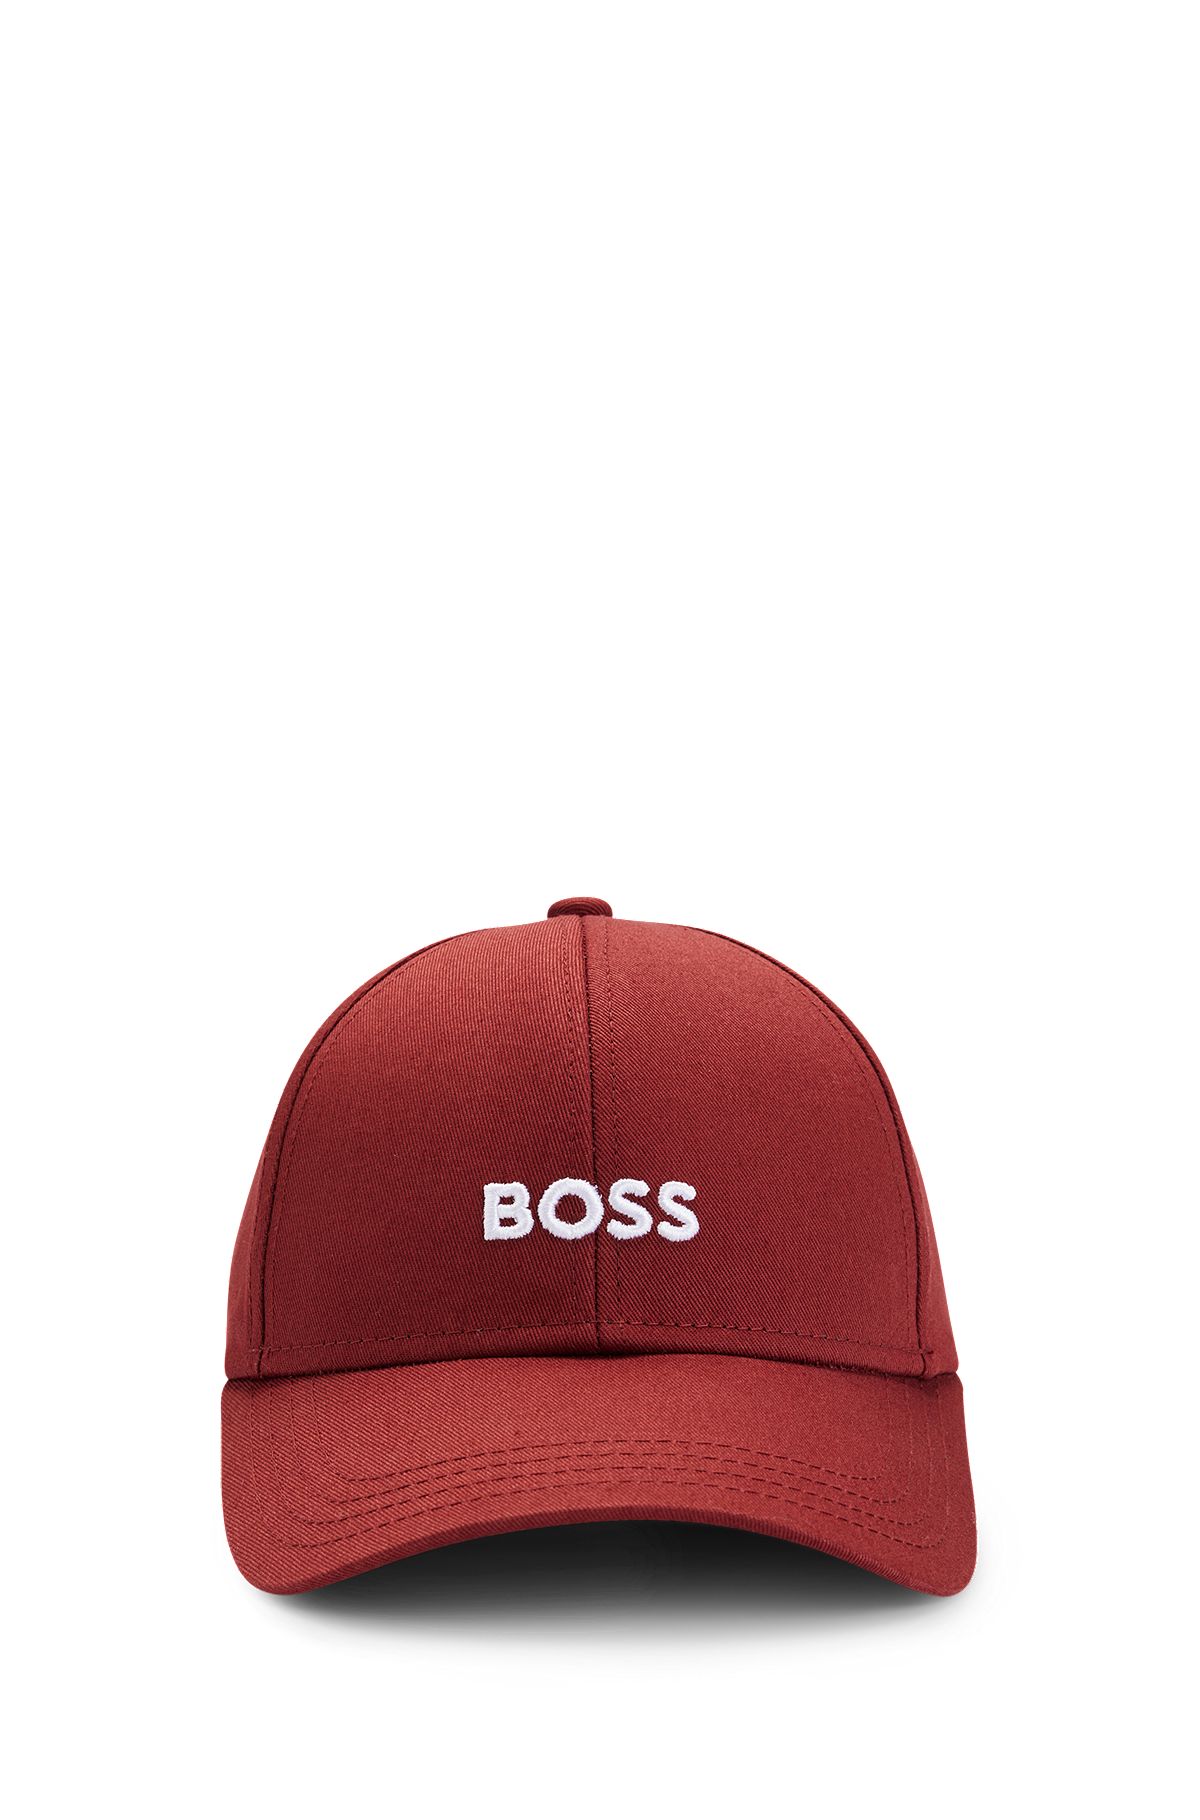 Men's Hats, Gloves and Scarves | HUGO BOSS® Men's Clothing Accessories